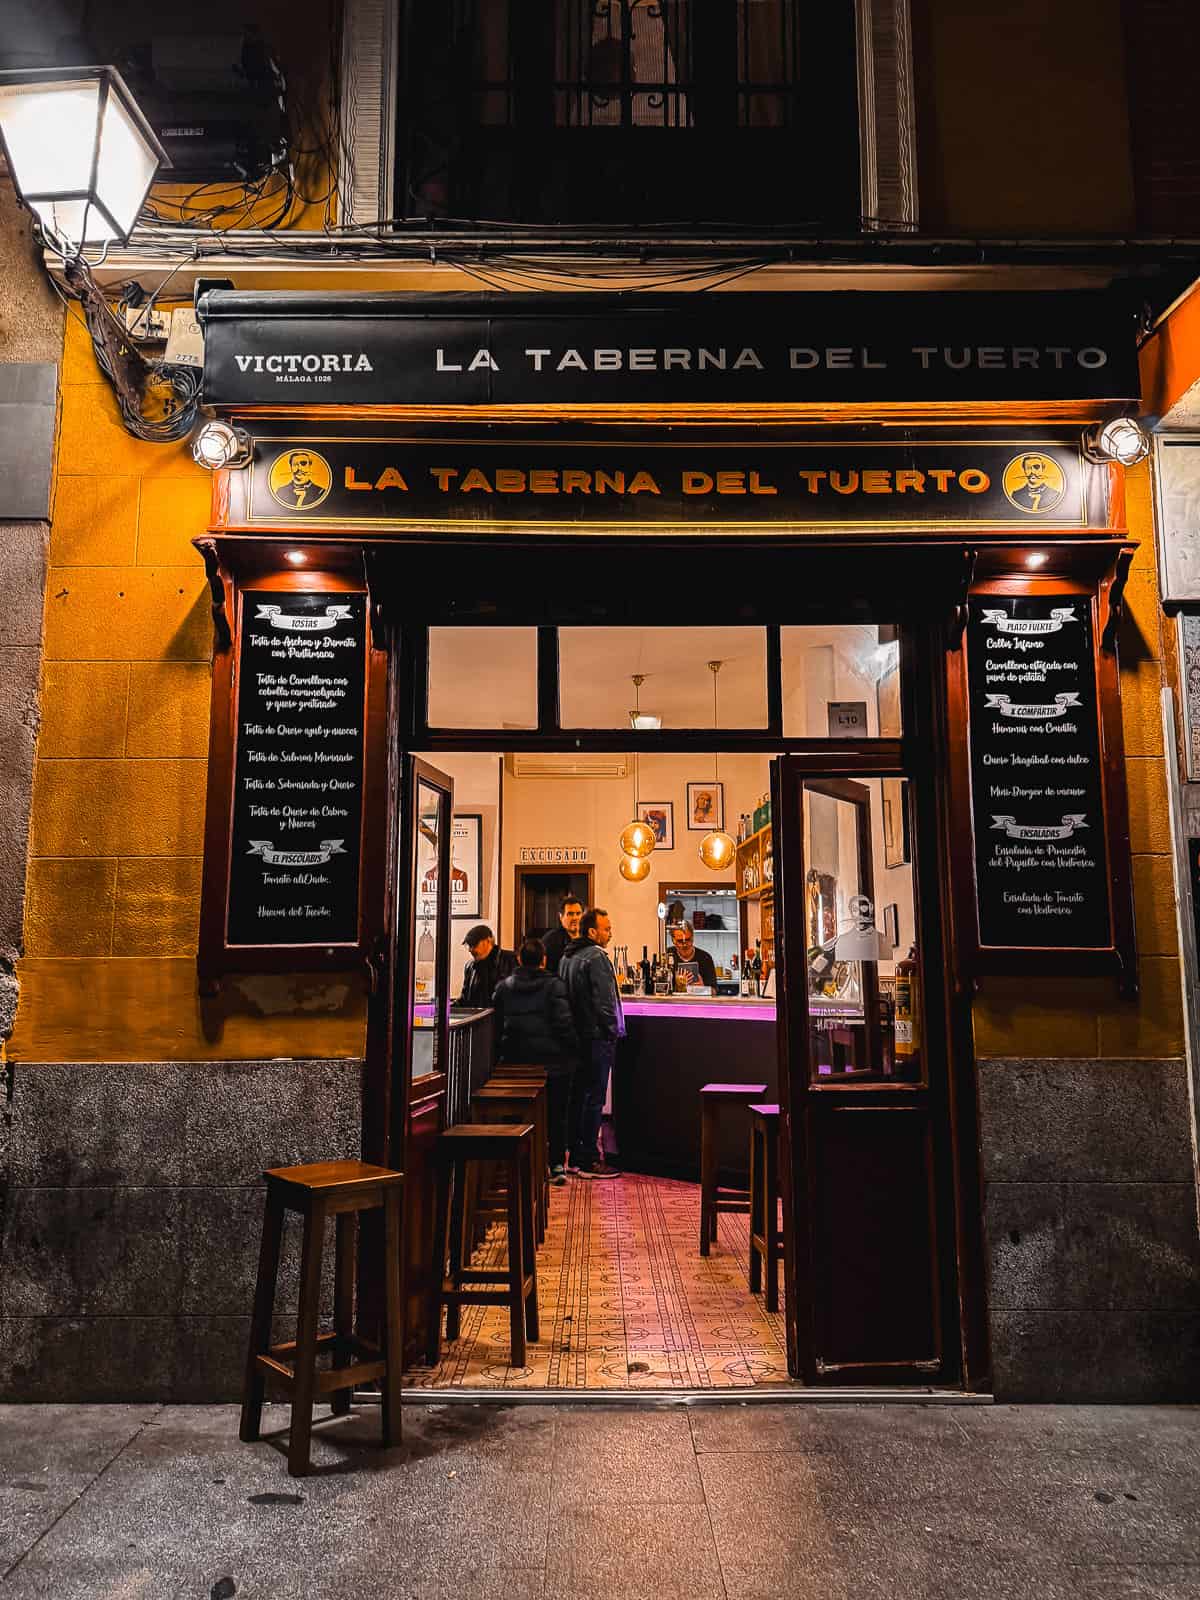 The entrance of 'La Taberna del Tuerto' at night, showcasing its warm yellow and purple facade, inviting patrons inside under a lit signboard